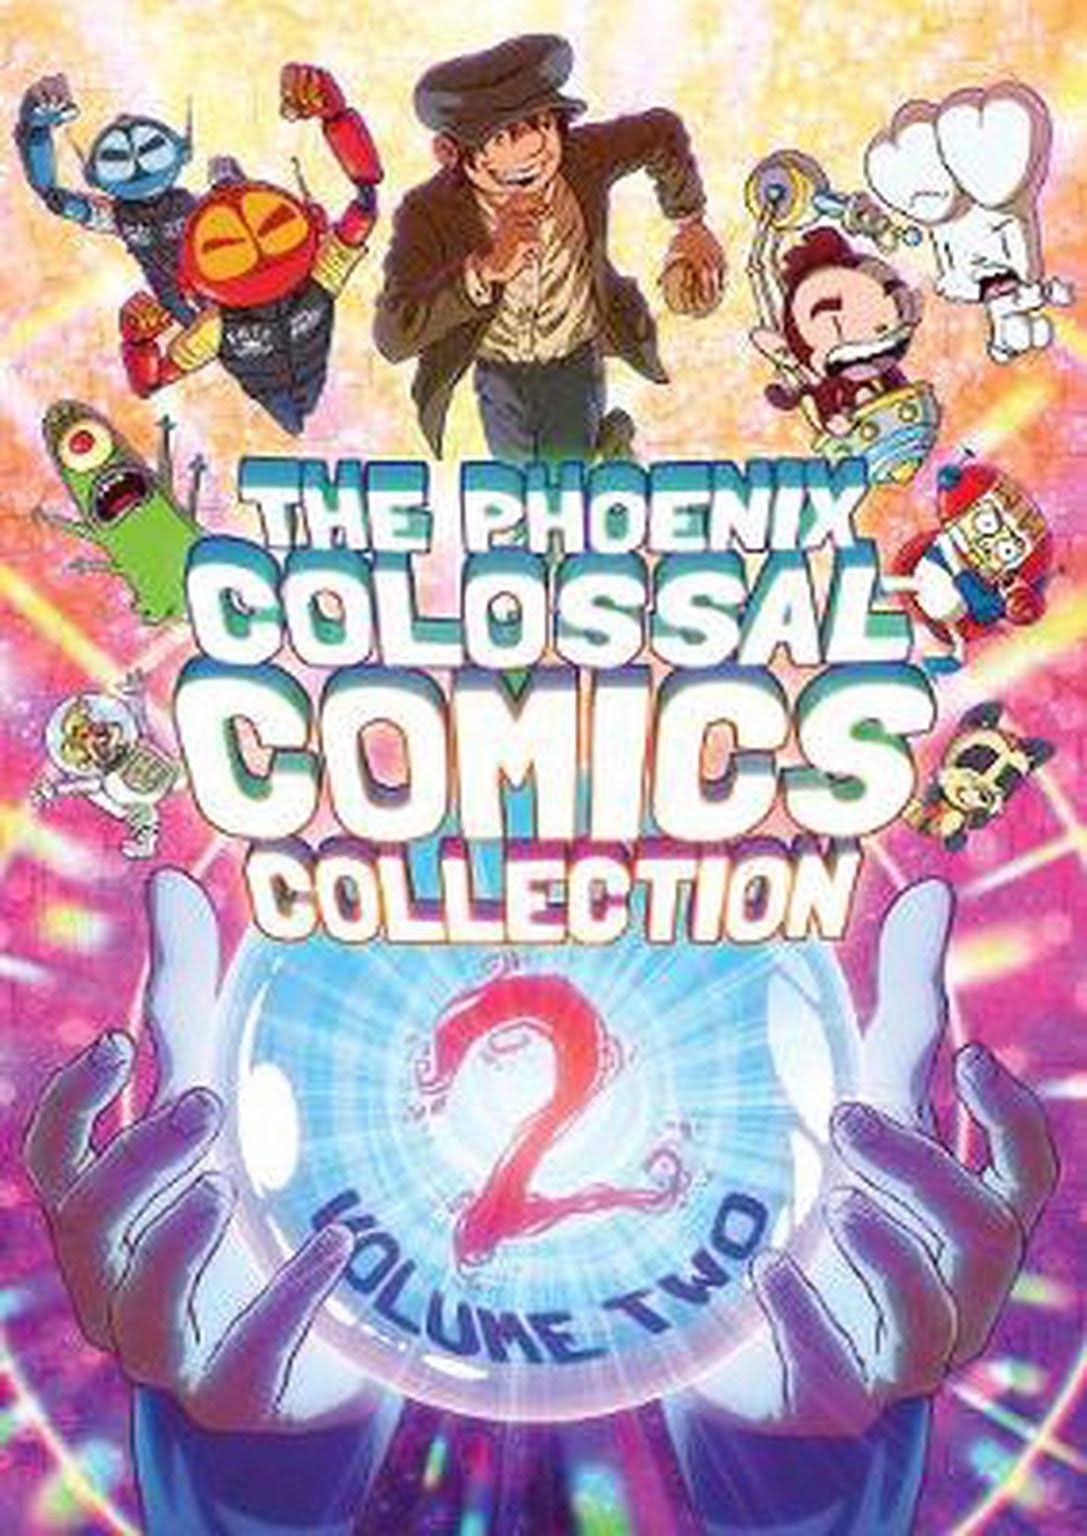 The Phoenix Colossal Comics Collection - Volume Two